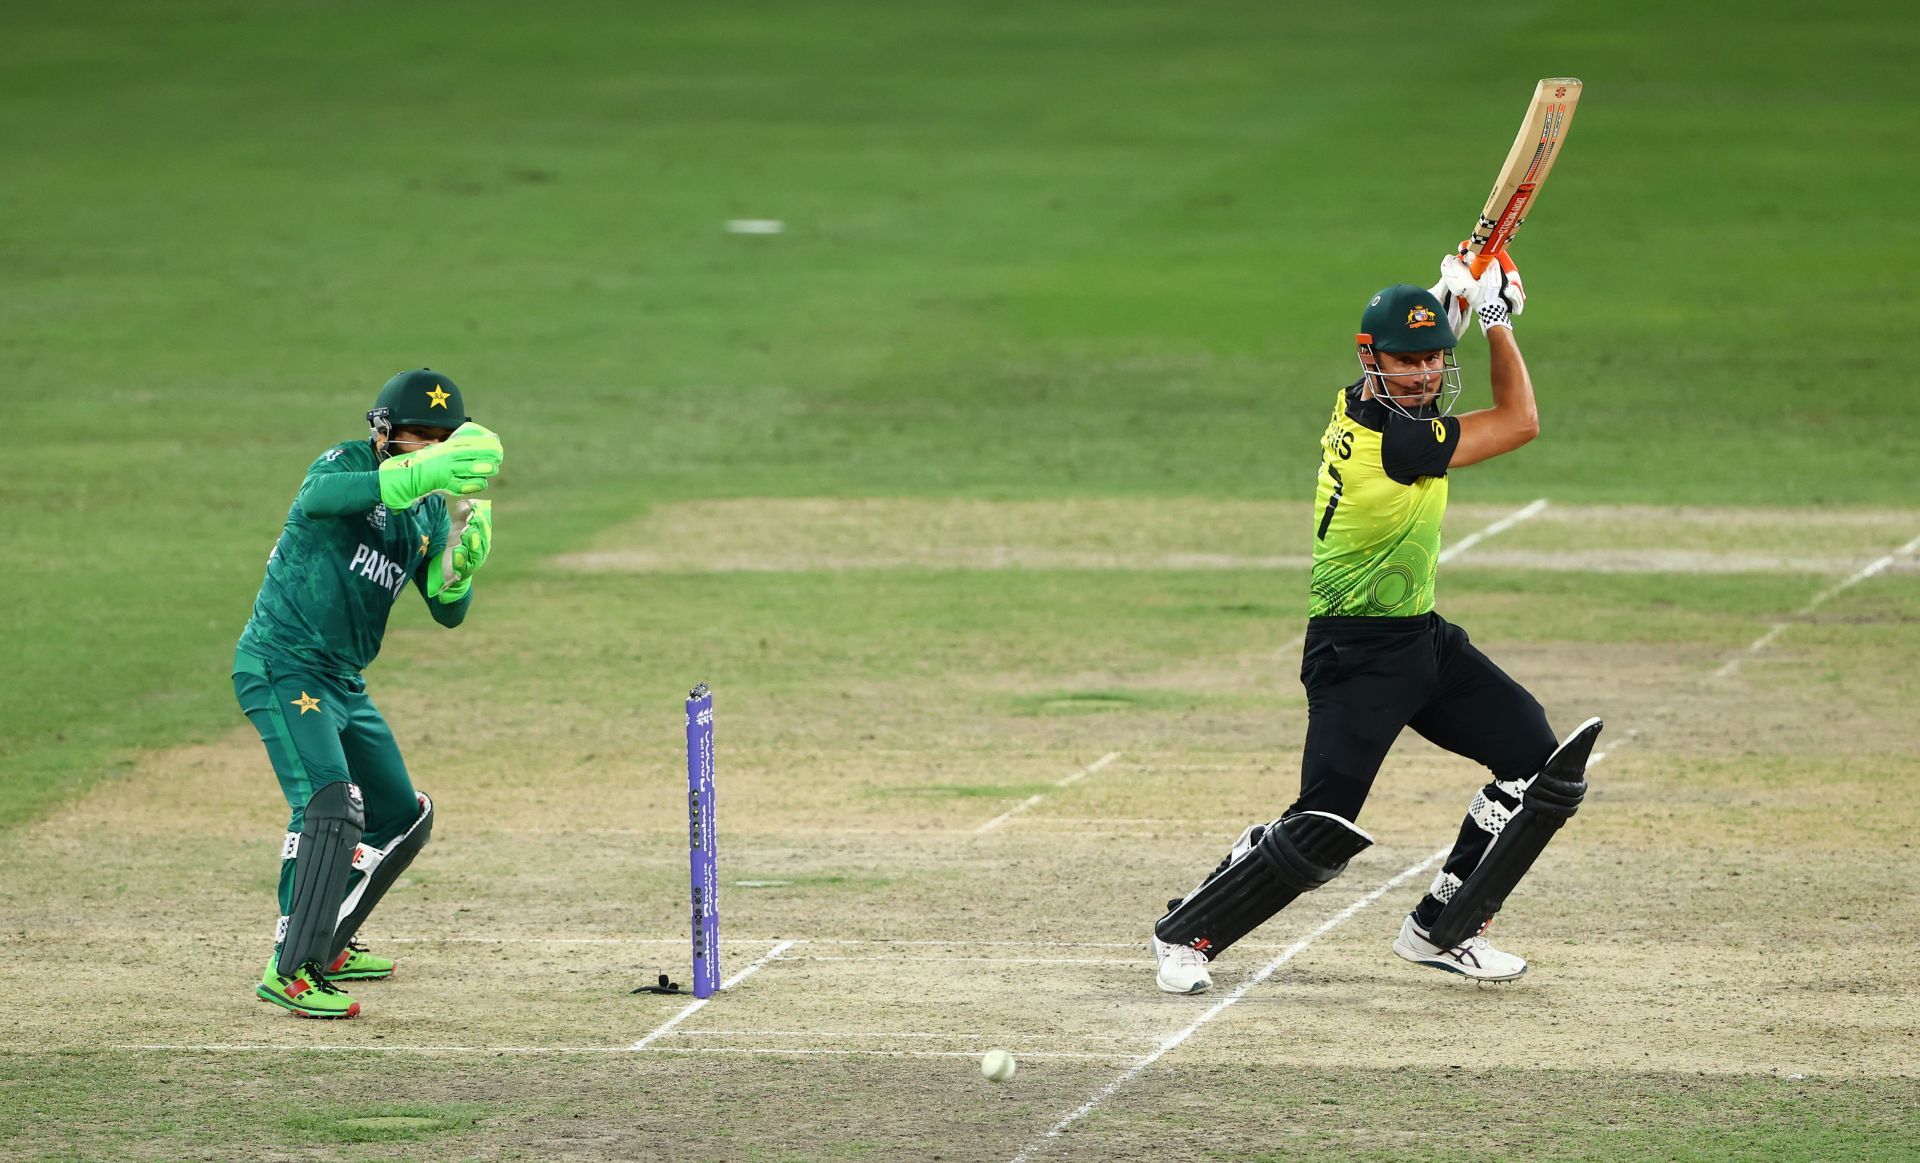 Pakistan and Australia recently met in the T20 World Cup.